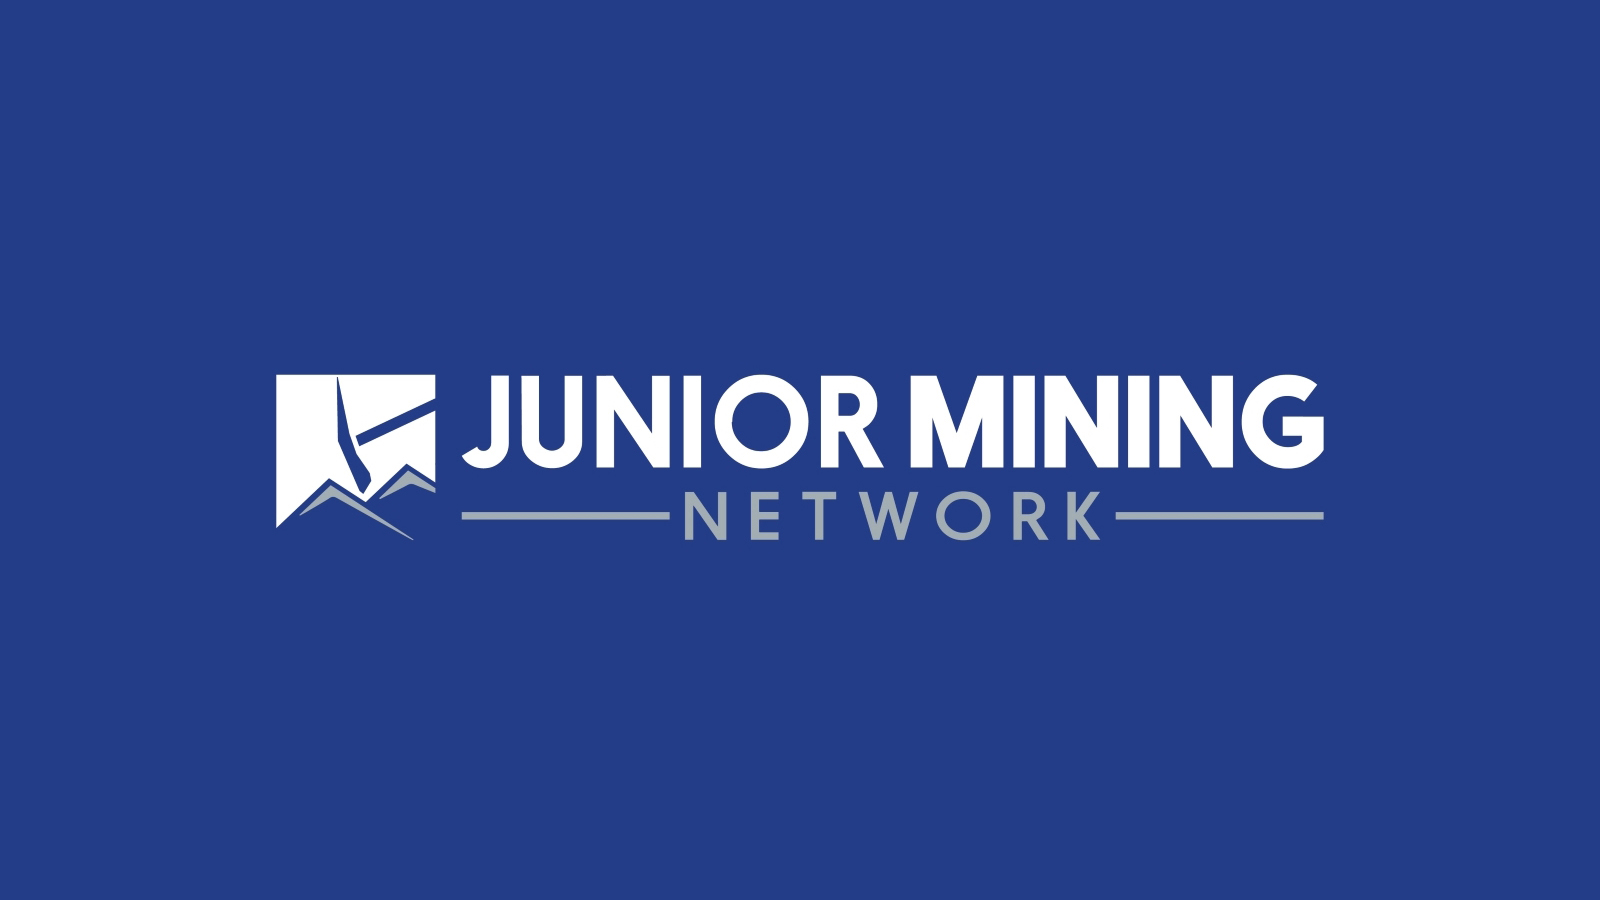 Manitou Gold Provides Update Regarding Upcoming Annual Meeting